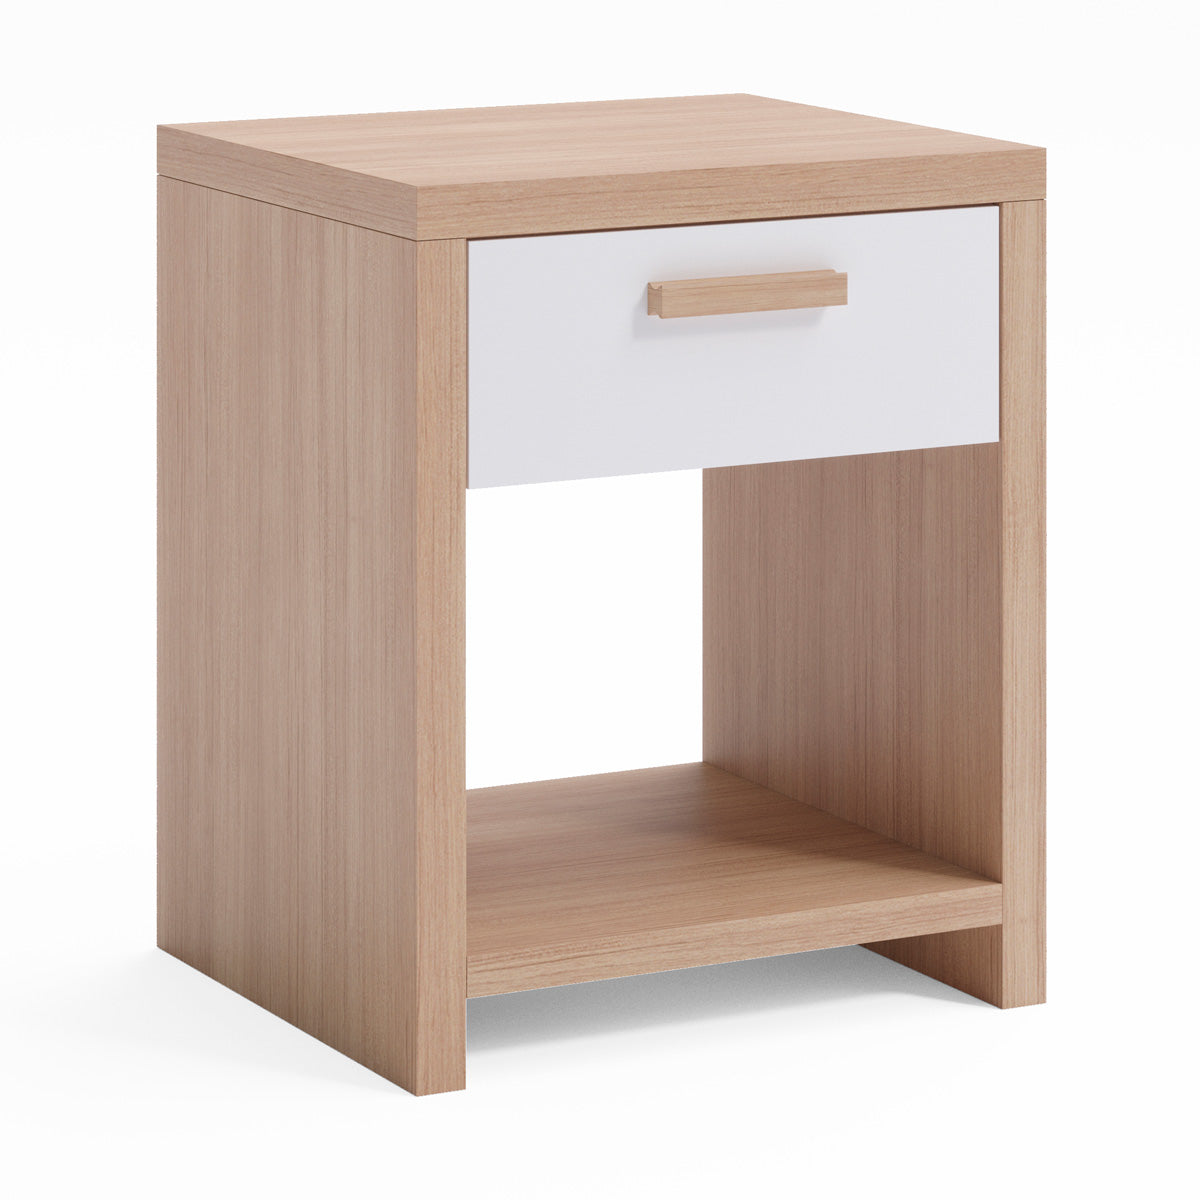 Oak Colour Wooden Bedside Table (Melody Collection)